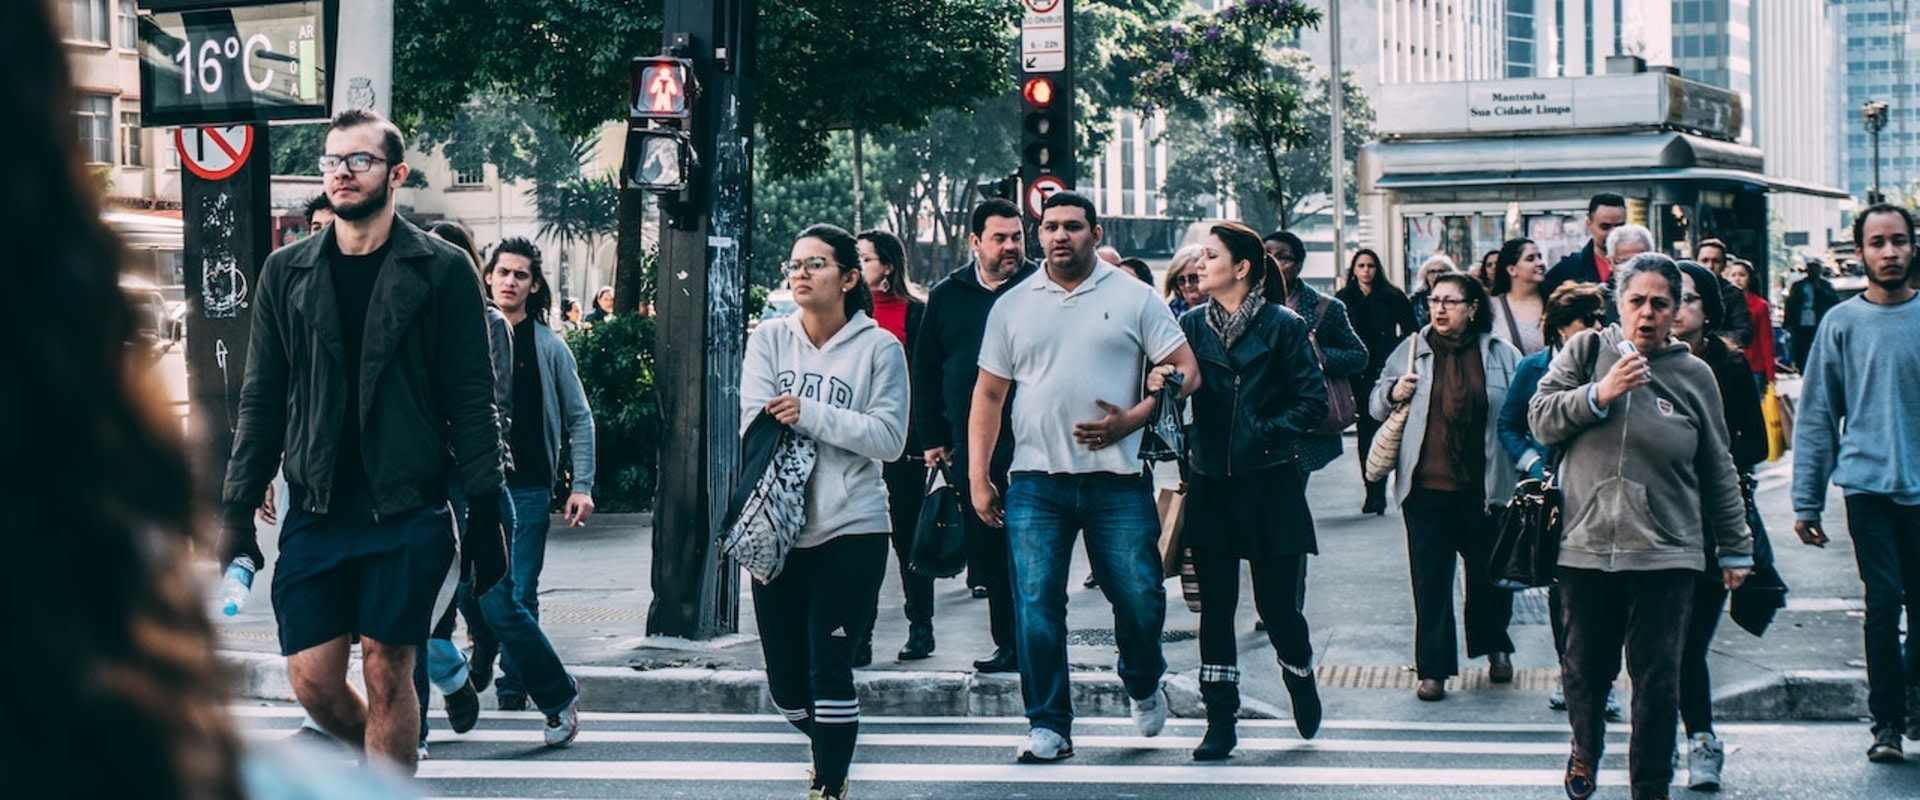 10 Most Common Pedestrian And Traffic Offenses In Los Angeles